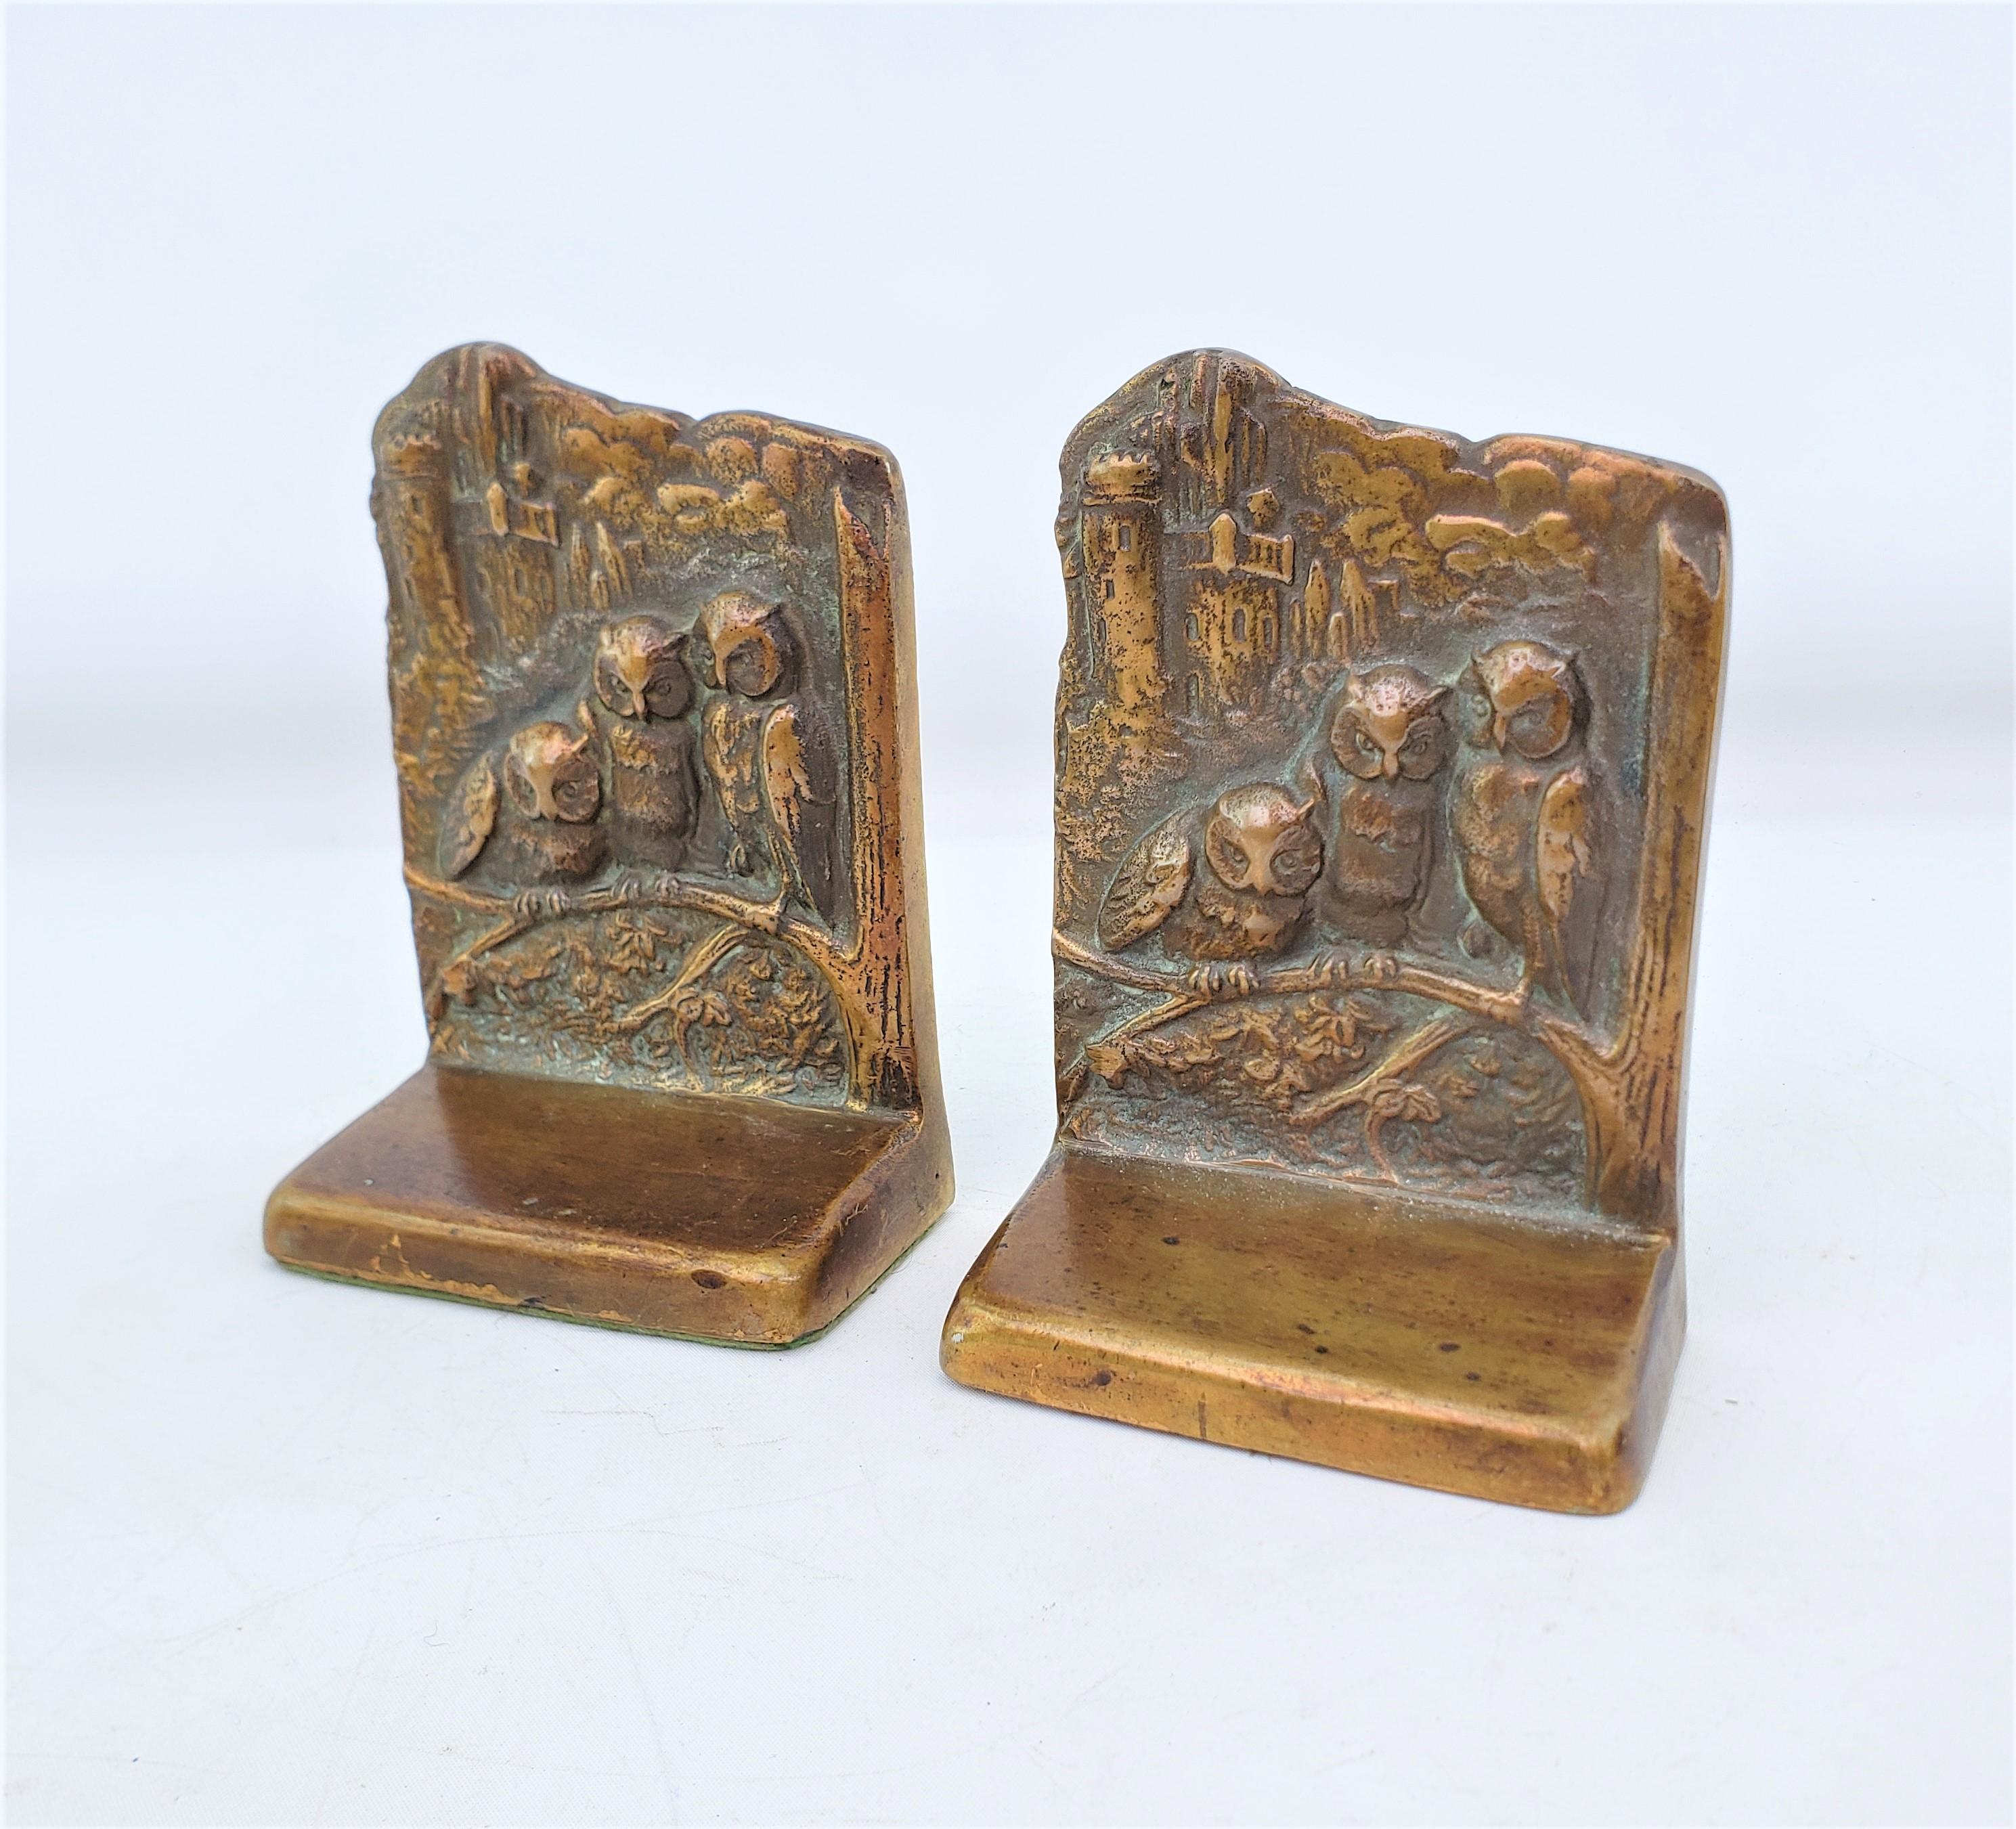 American Antique Art Deco Cast & Patinated Brass Bookends Depicting Three Perched Owls For Sale